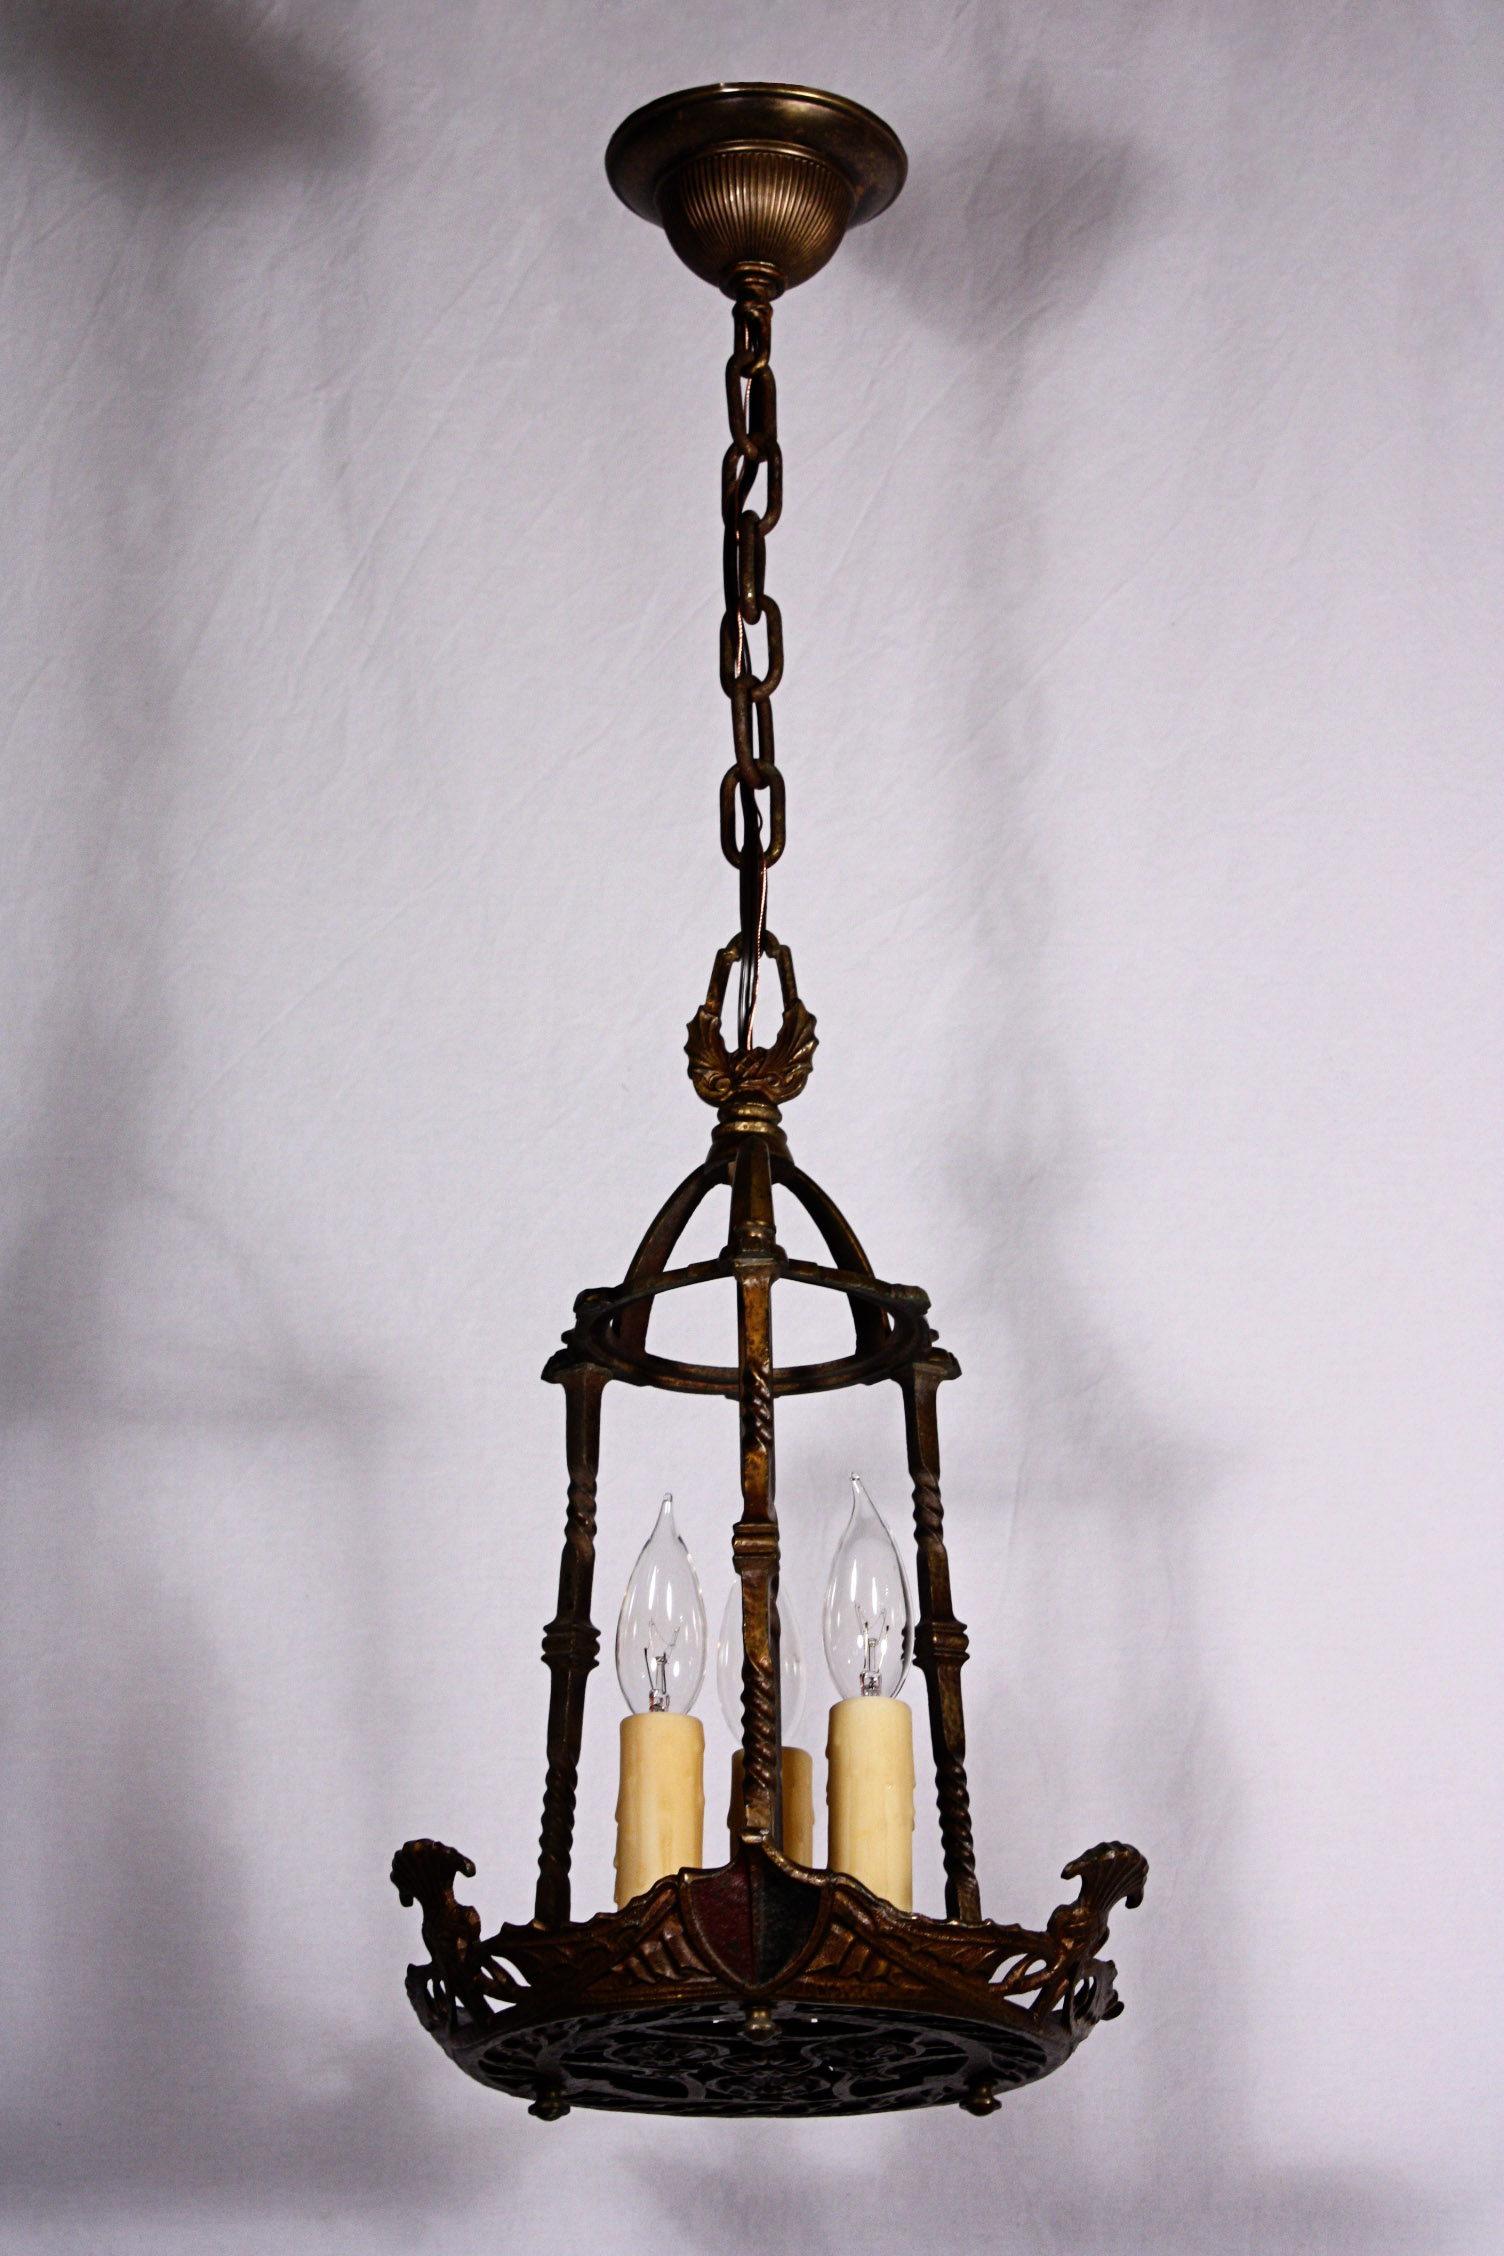 SOLD Striking Antique Three-Light Pendant with Shields-18871